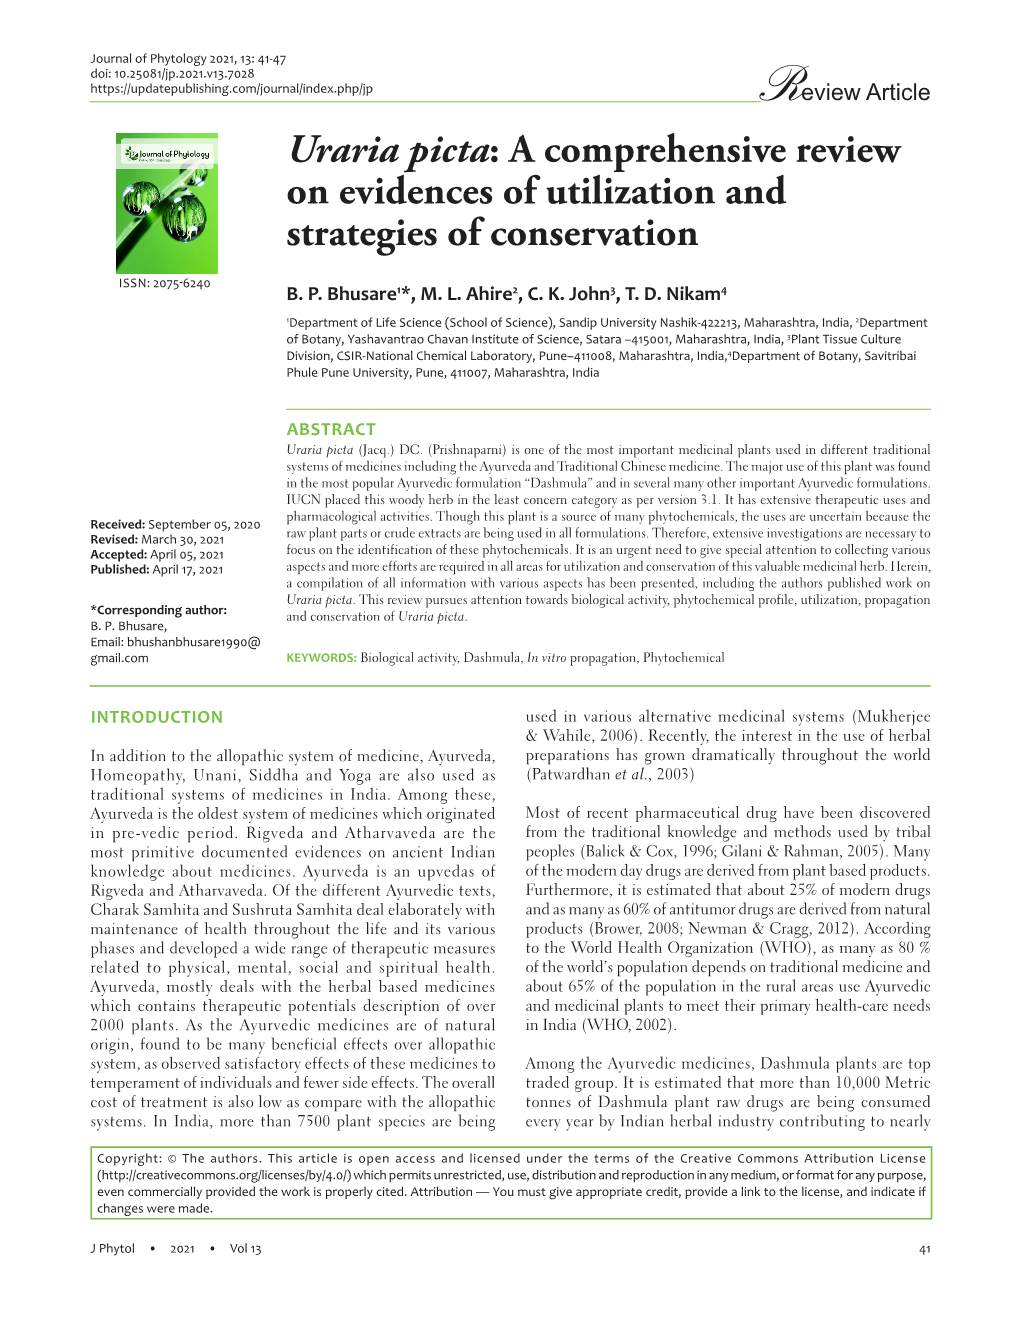 Uraria Picta: a Comprehensive Review on Evidences of Utilization and Strategies of Conservation